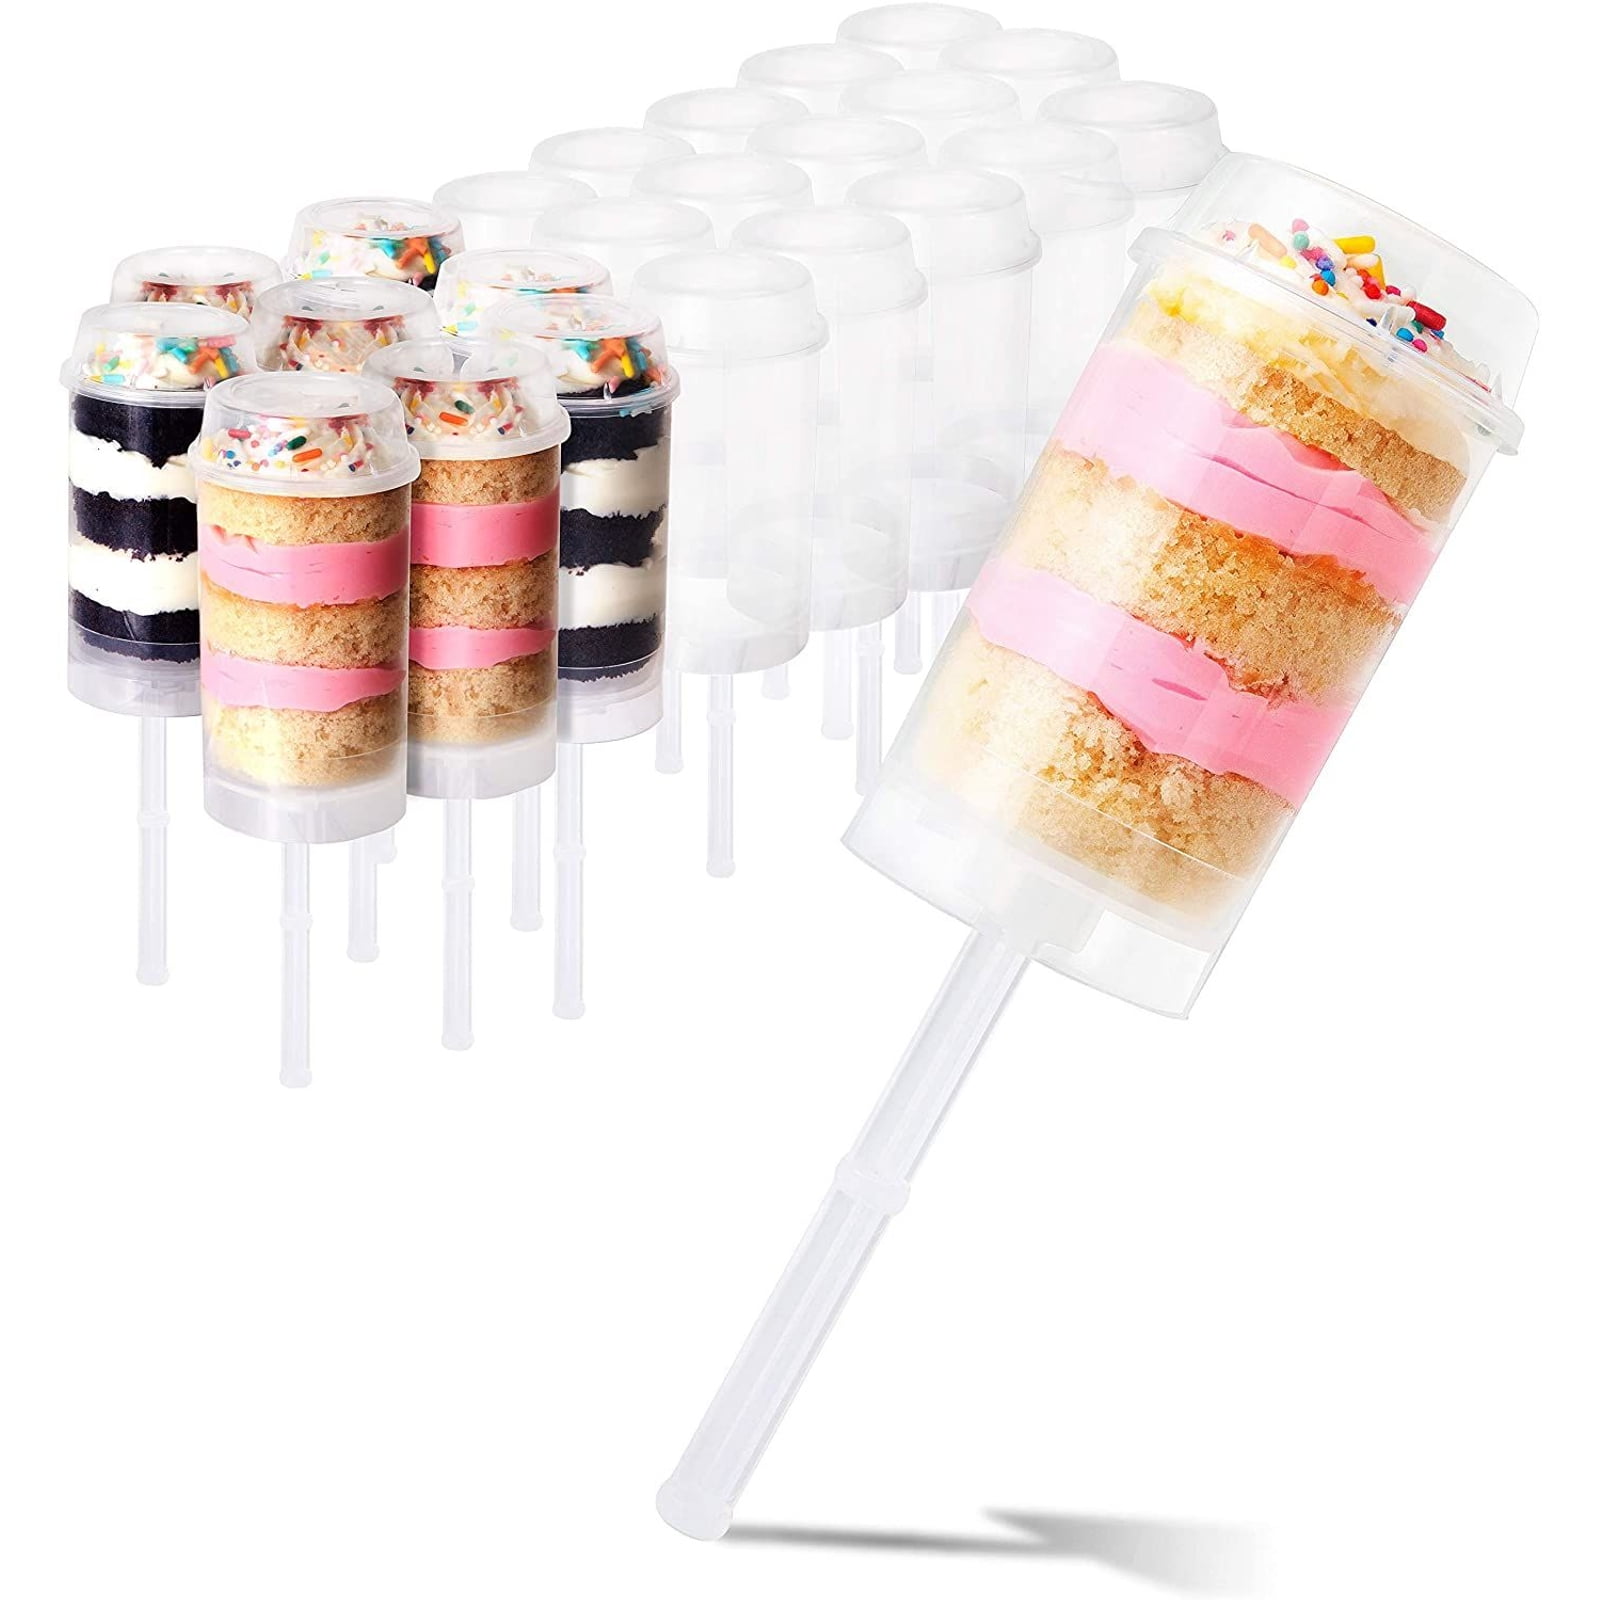 Lenwen 120 Pieces Plastic Cake Push up Container Cake Pop Shooter Heart  Shaped Clear Empty Push Pop Containers with Lids Base and Stick for Dessert